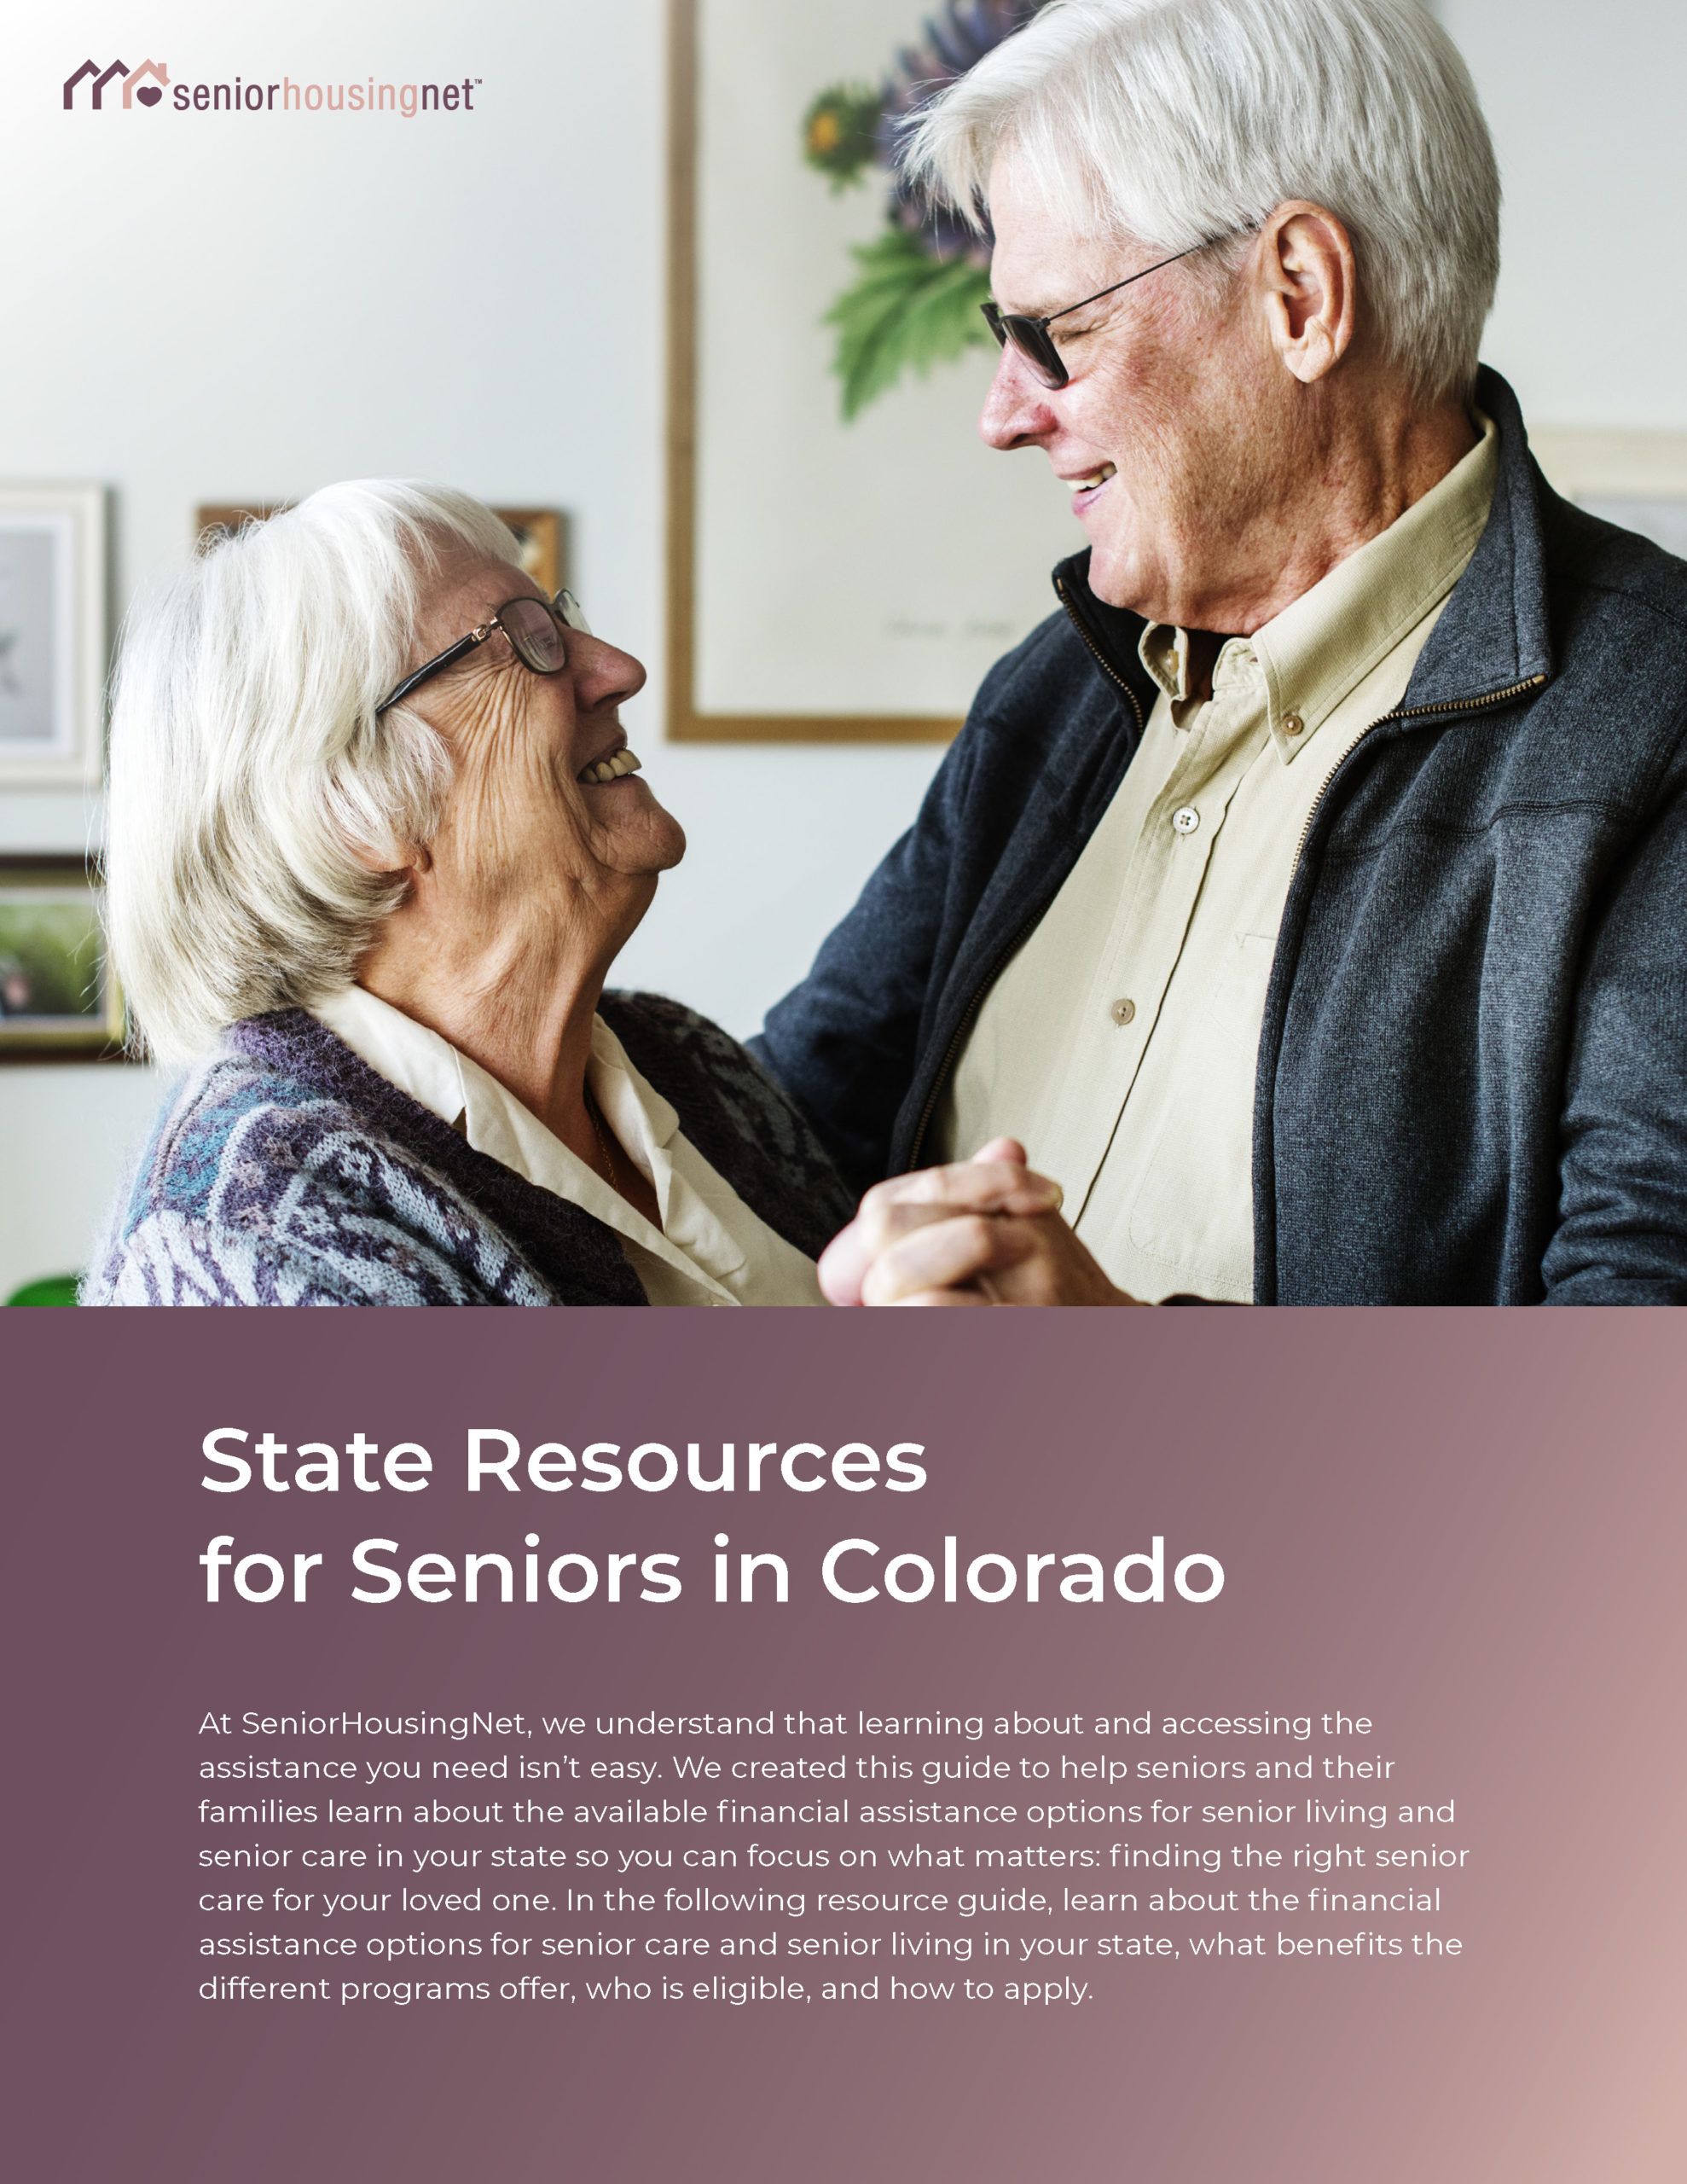 State Resources for Seniors in Colorado